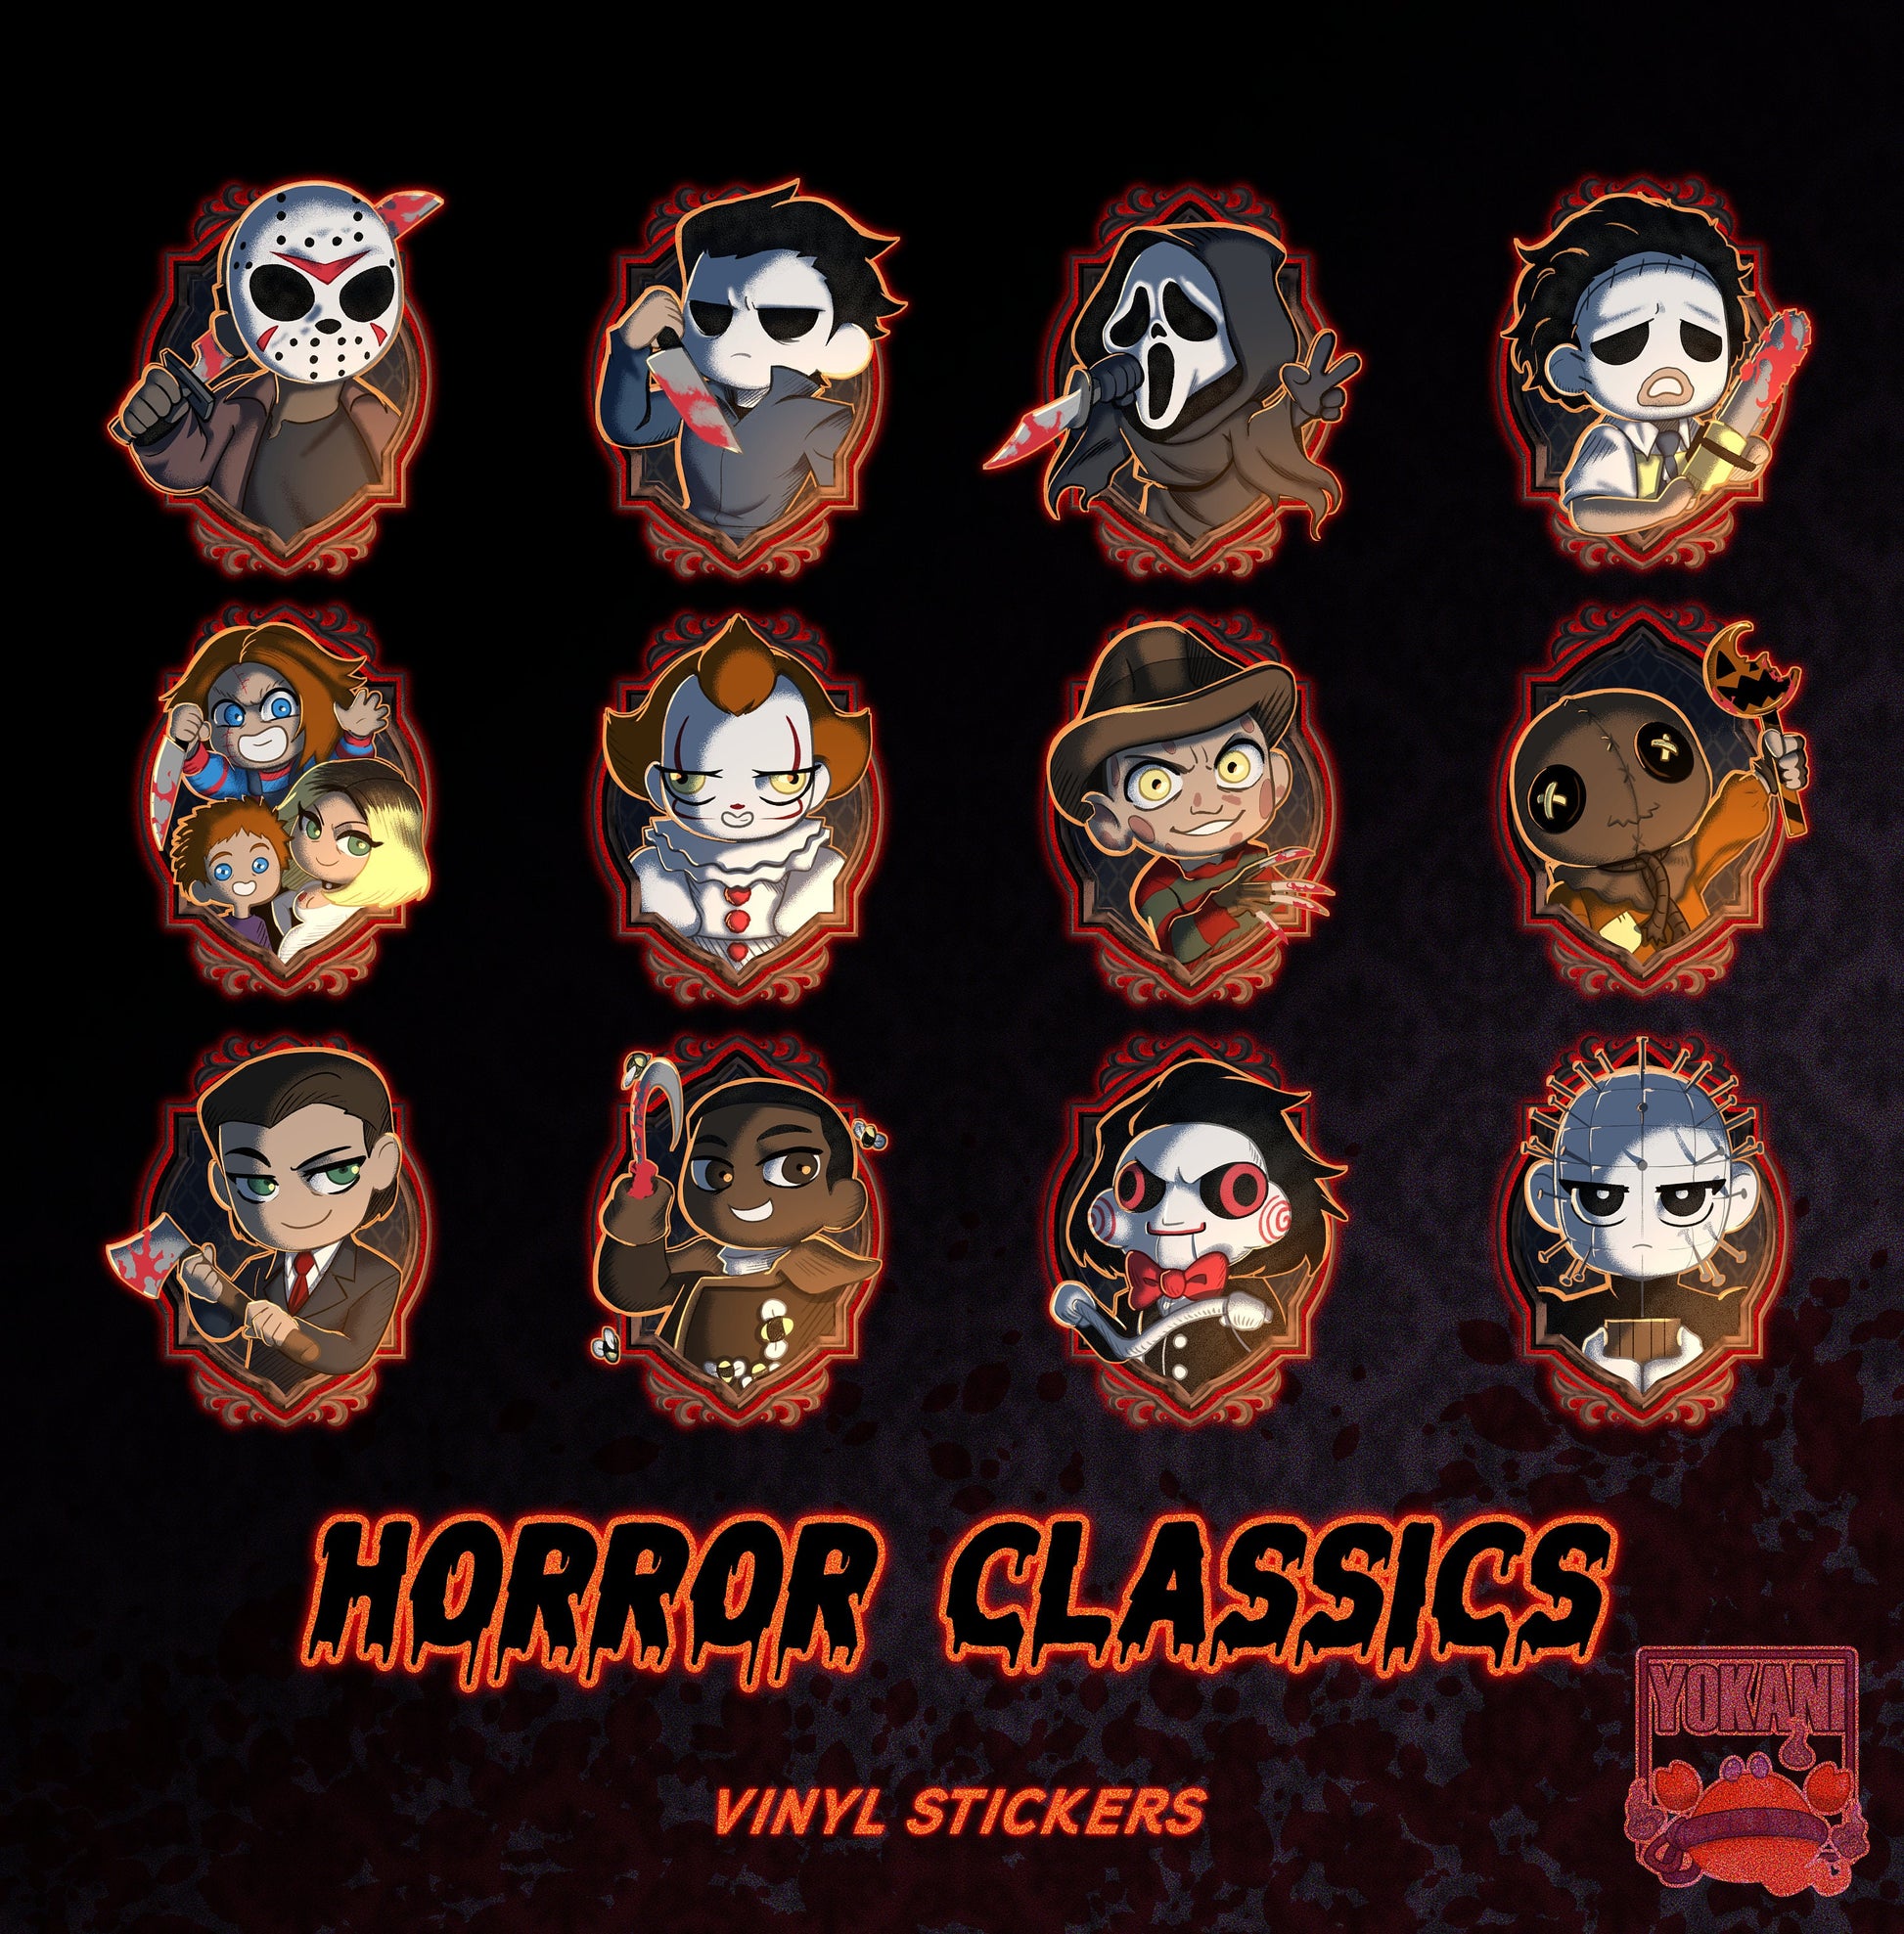 HORROR CLASSICS: Cute Slasher Stickers - Michael Myers, Leatherface, Jason Voorhees, Sam, Jigsaw, Billy the Puppet, Freddy Krueger and more!